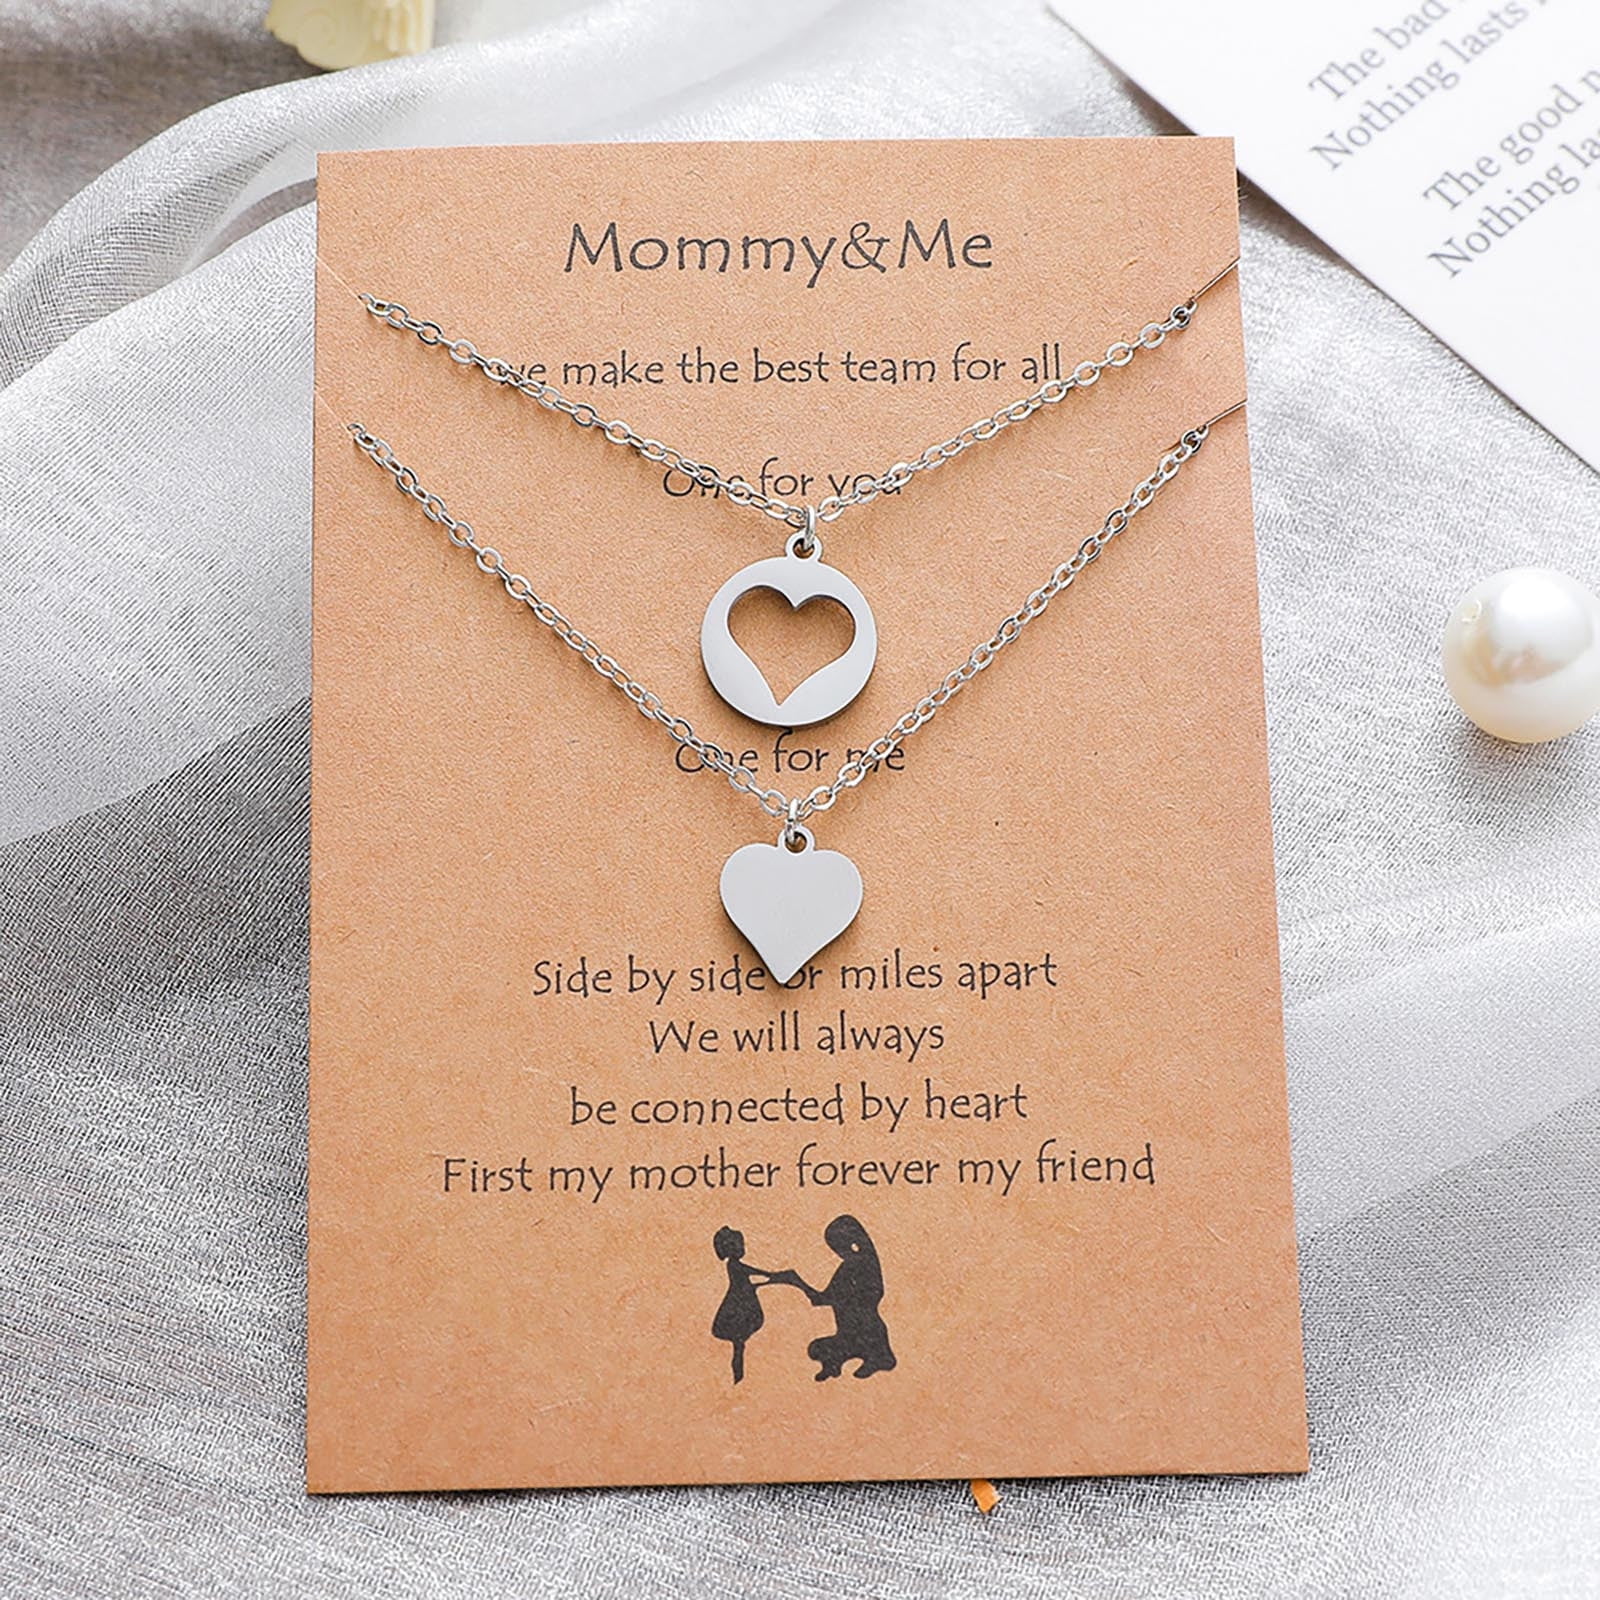 Mother Daughter Necklace For A Special Bond - Inspire Uplift